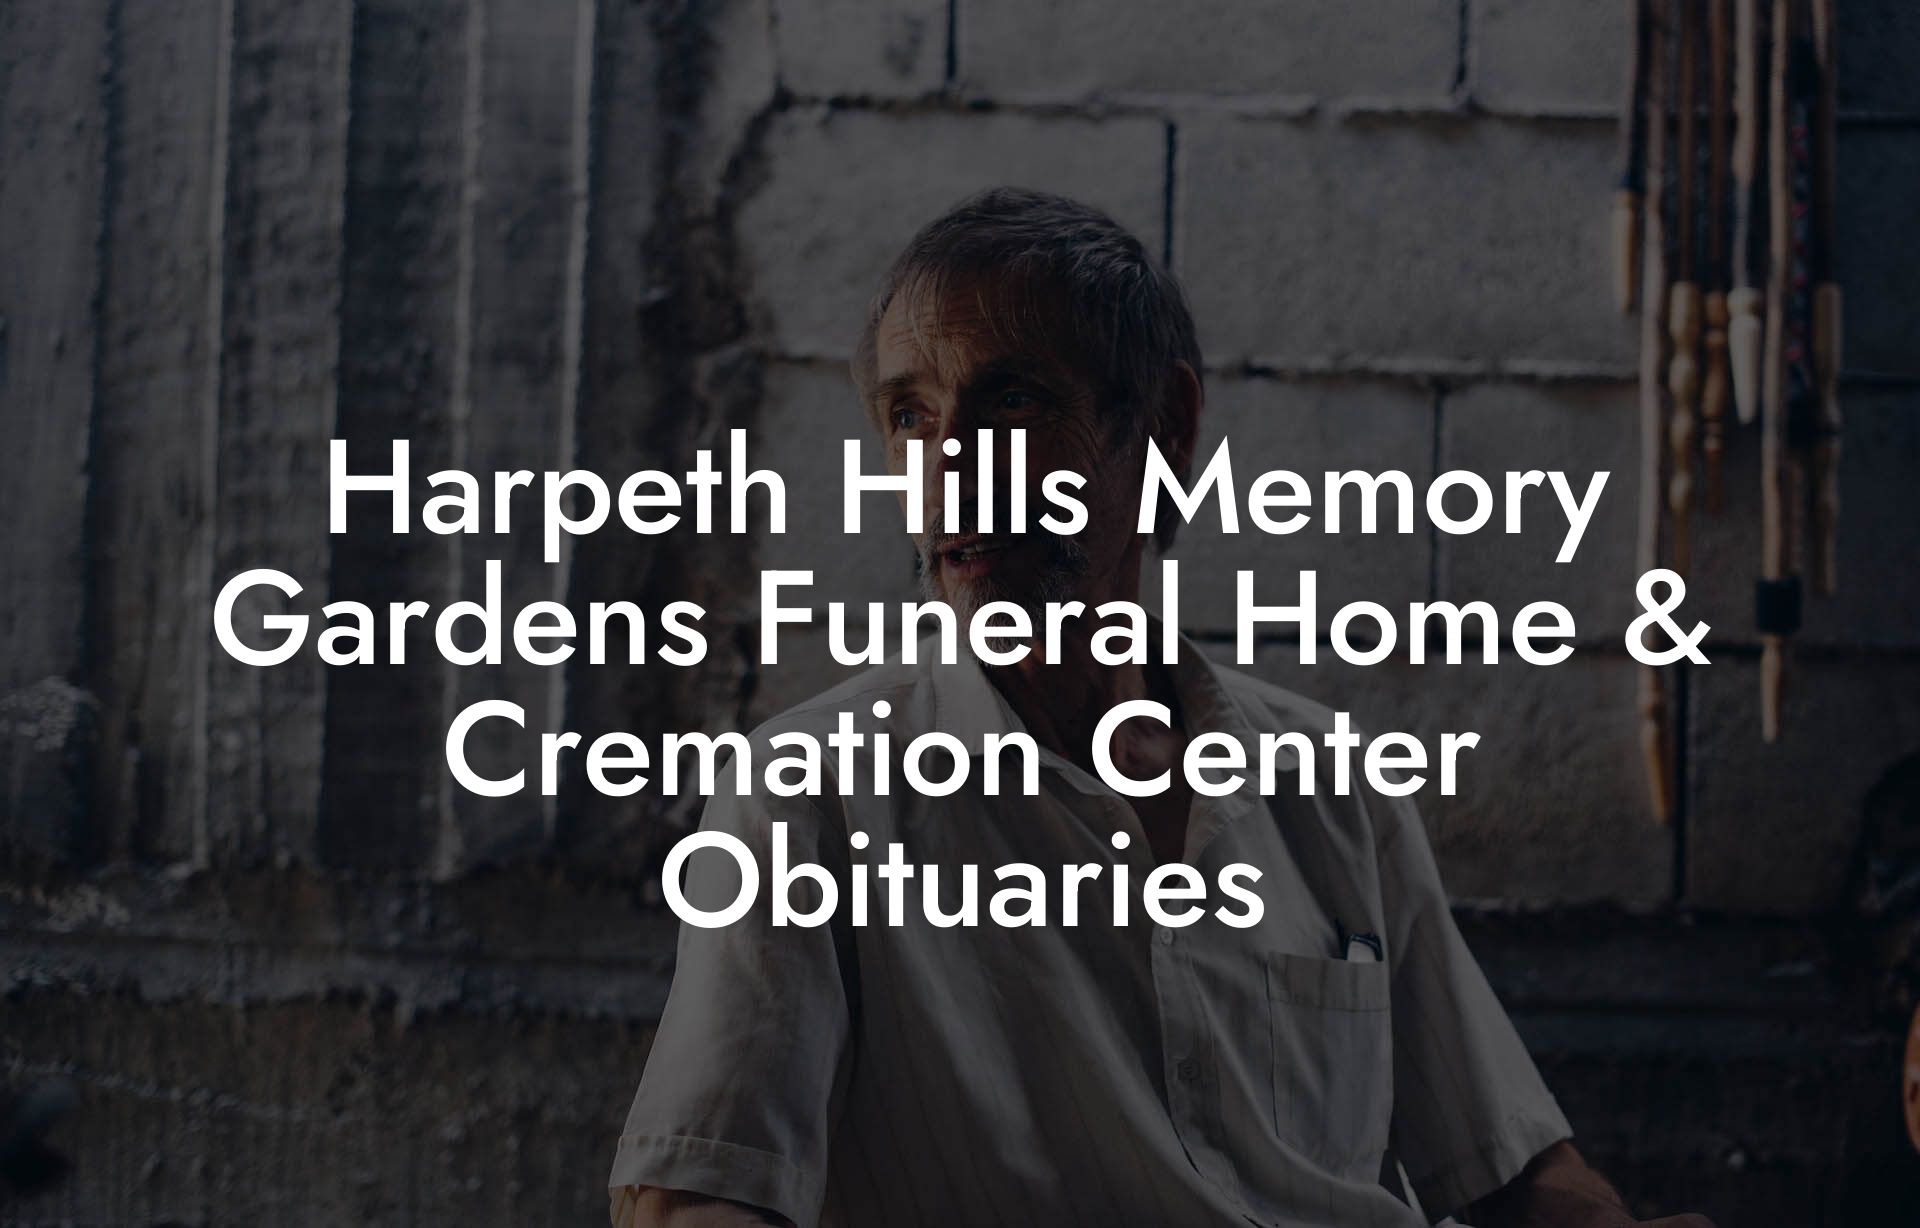 Harpeth Hills Memory Gardens Funeral Home & Cremation Center Obituaries